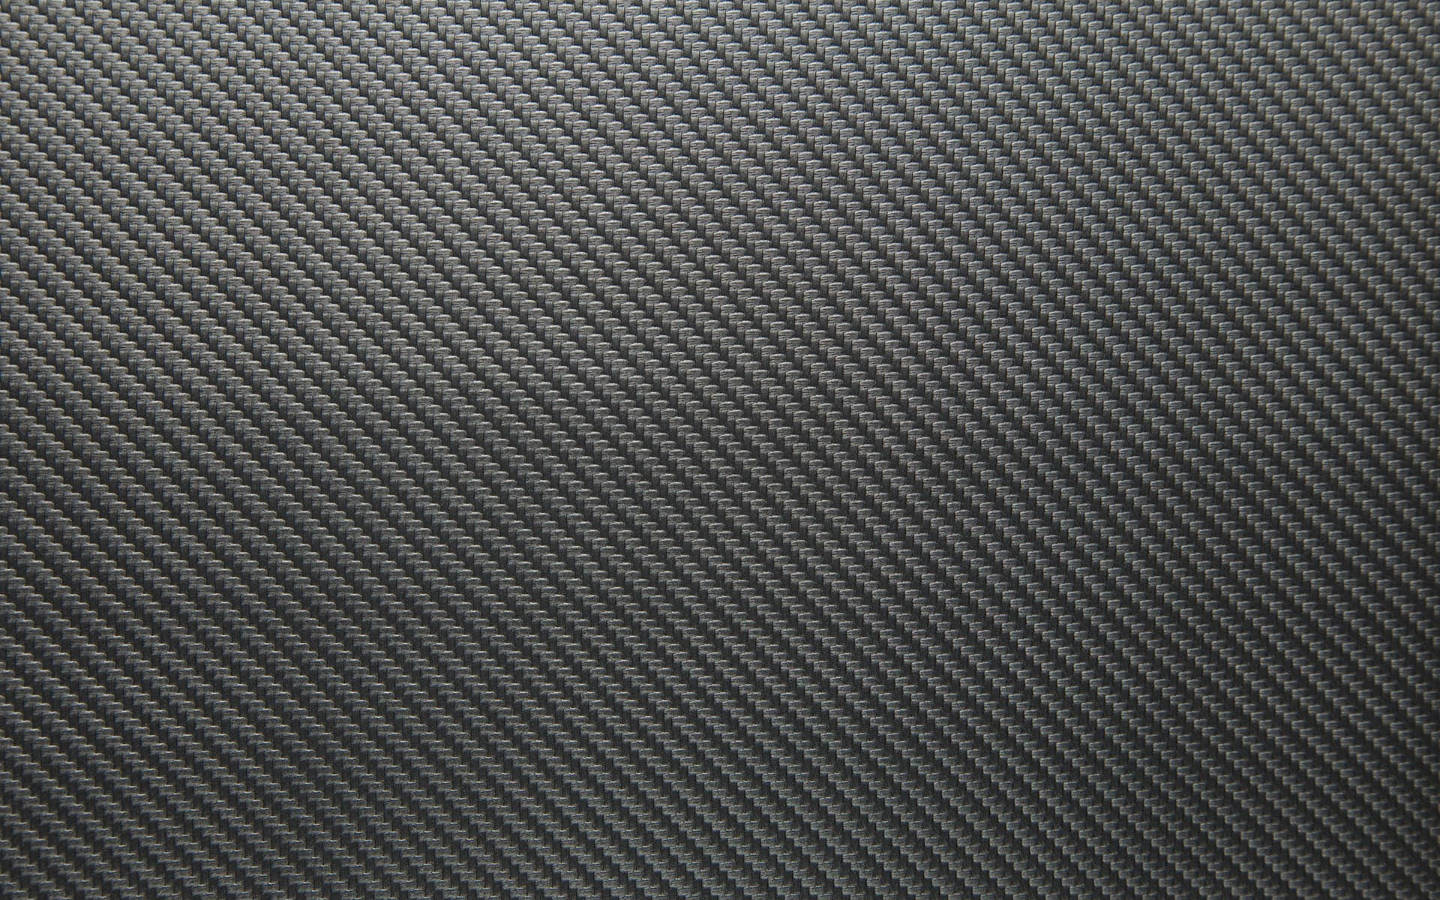 Gråkolfiber 4k (assuming This Is The Name Or Description Of A Computer Or Mobile Wallpaper) Wallpaper